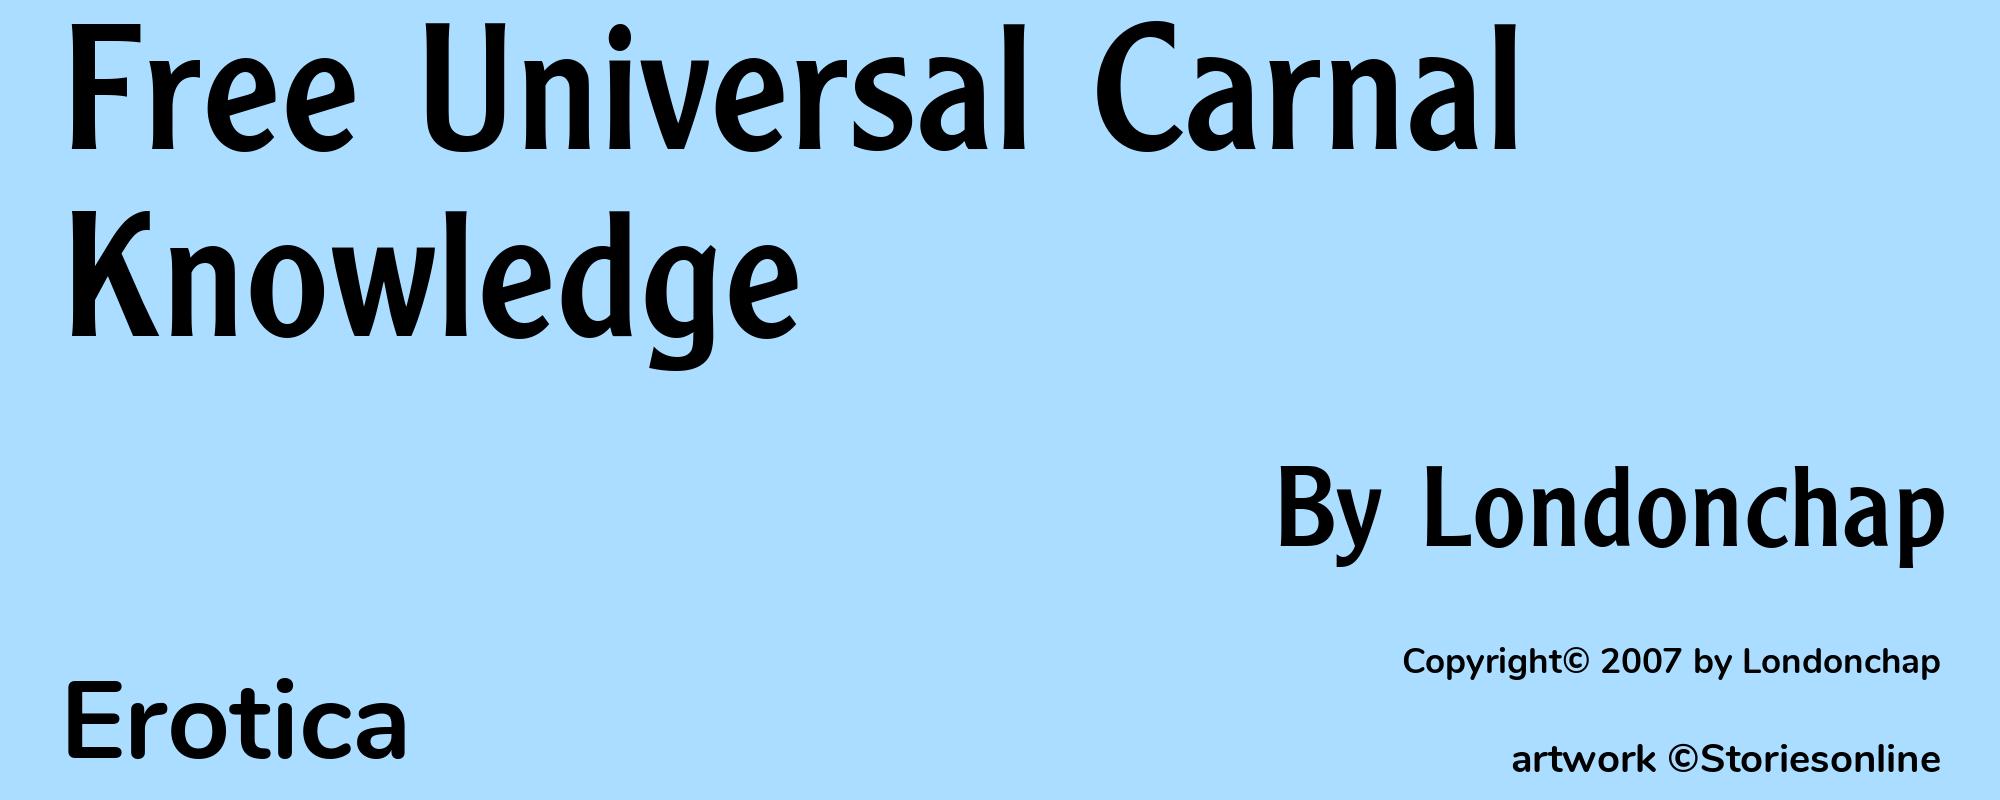 Free Universal Carnal Knowledge - Cover